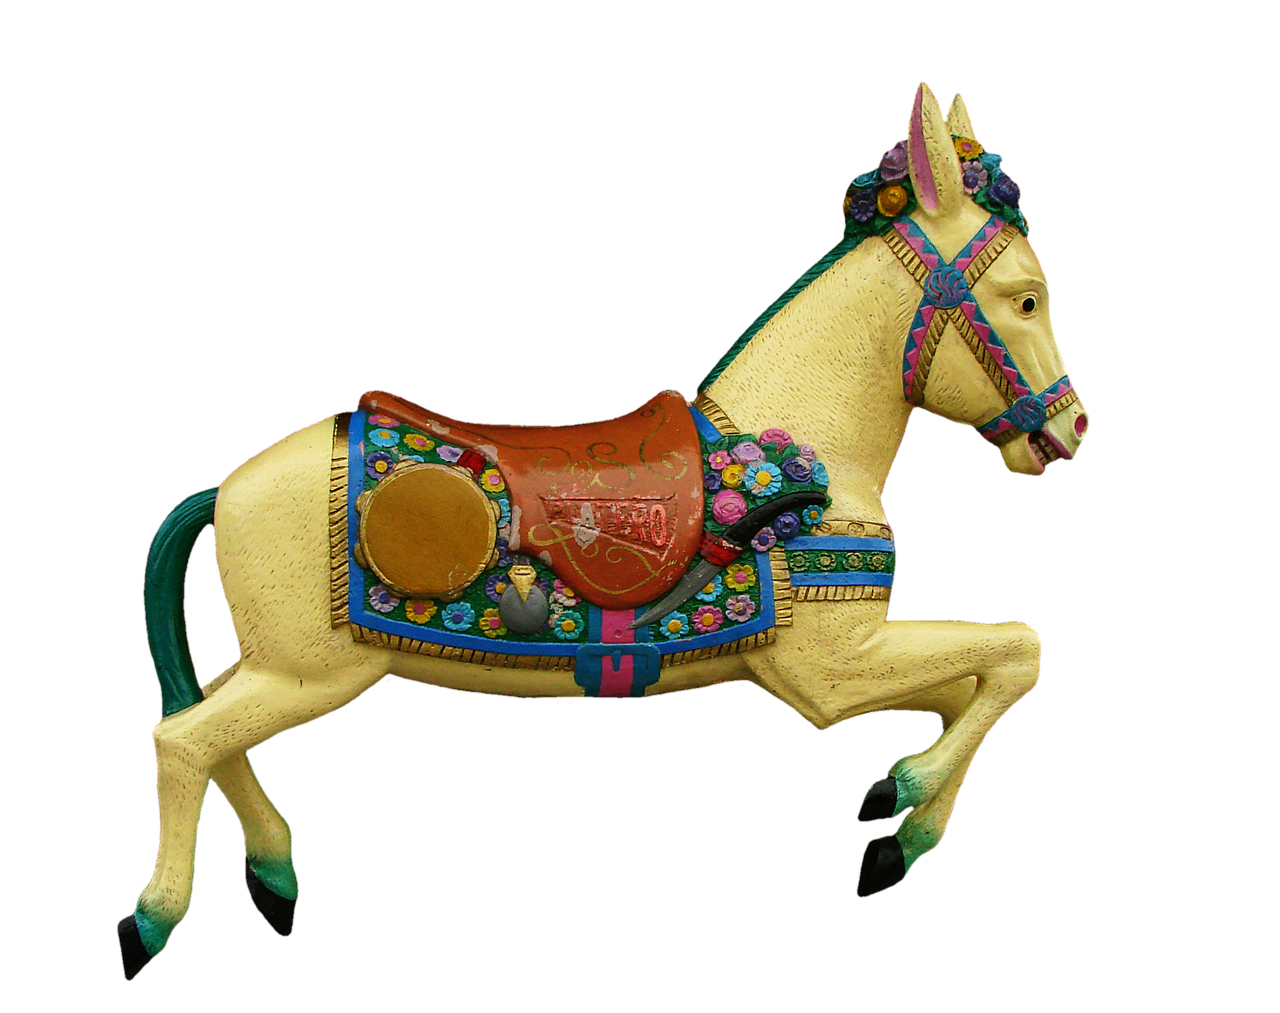 Download free photo of Carousel horse,carousel,horse,ride,turn - from ...